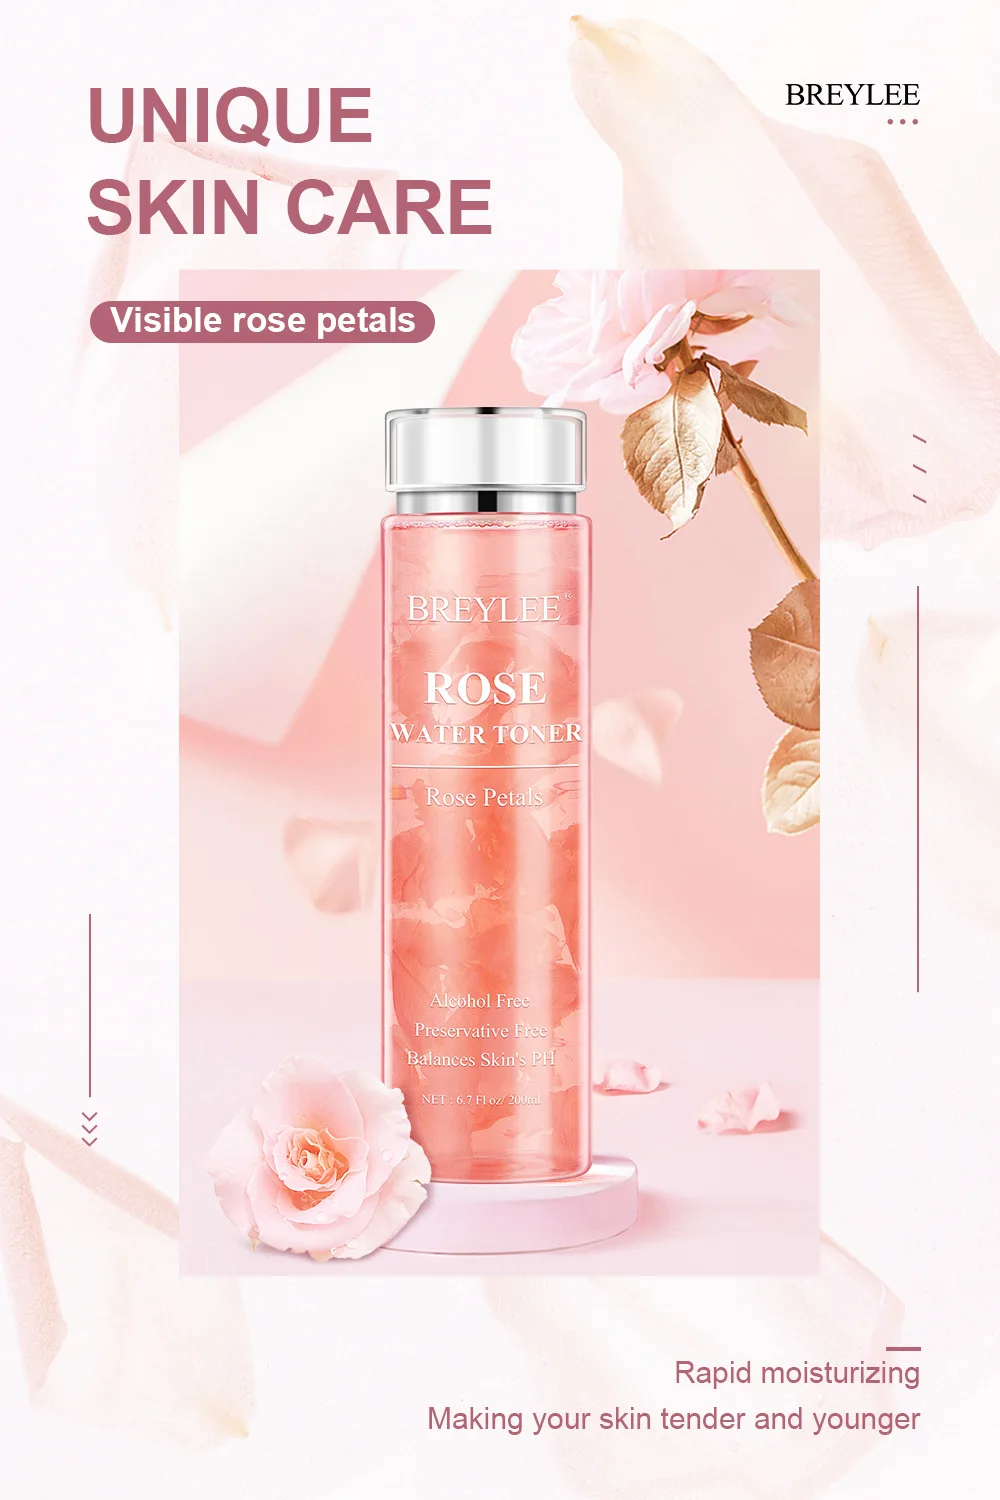 BREYLEE ROSE WATER TONER Natural Plant Extract whitening acne treatment face toner for oil control